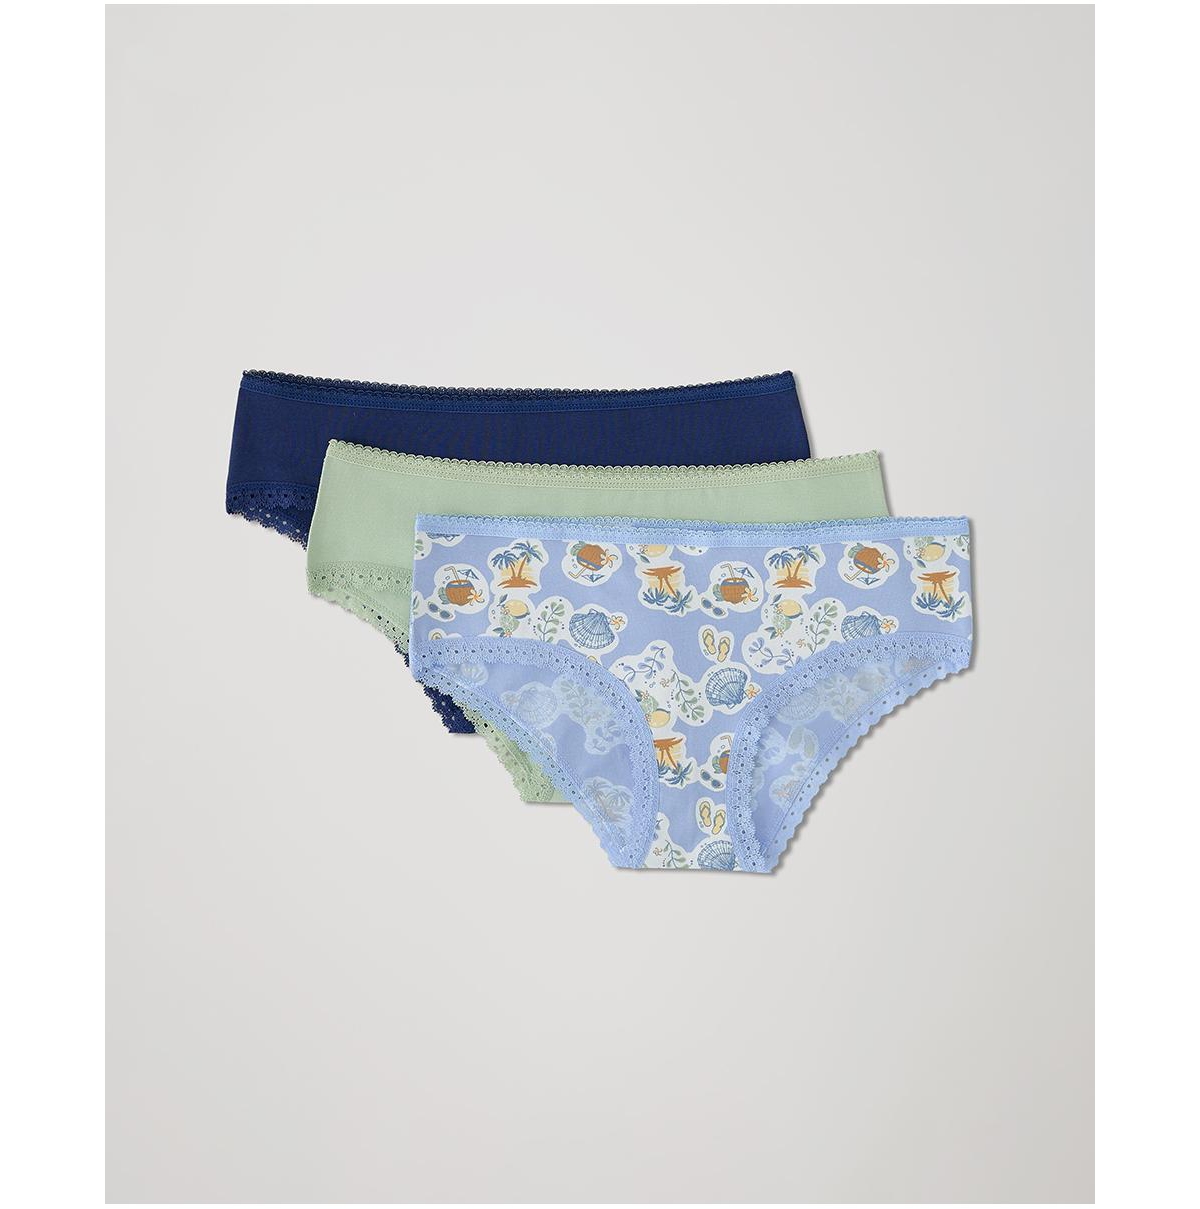 Women's Lace Cheeky Hipster 3-Pack - Sea shells